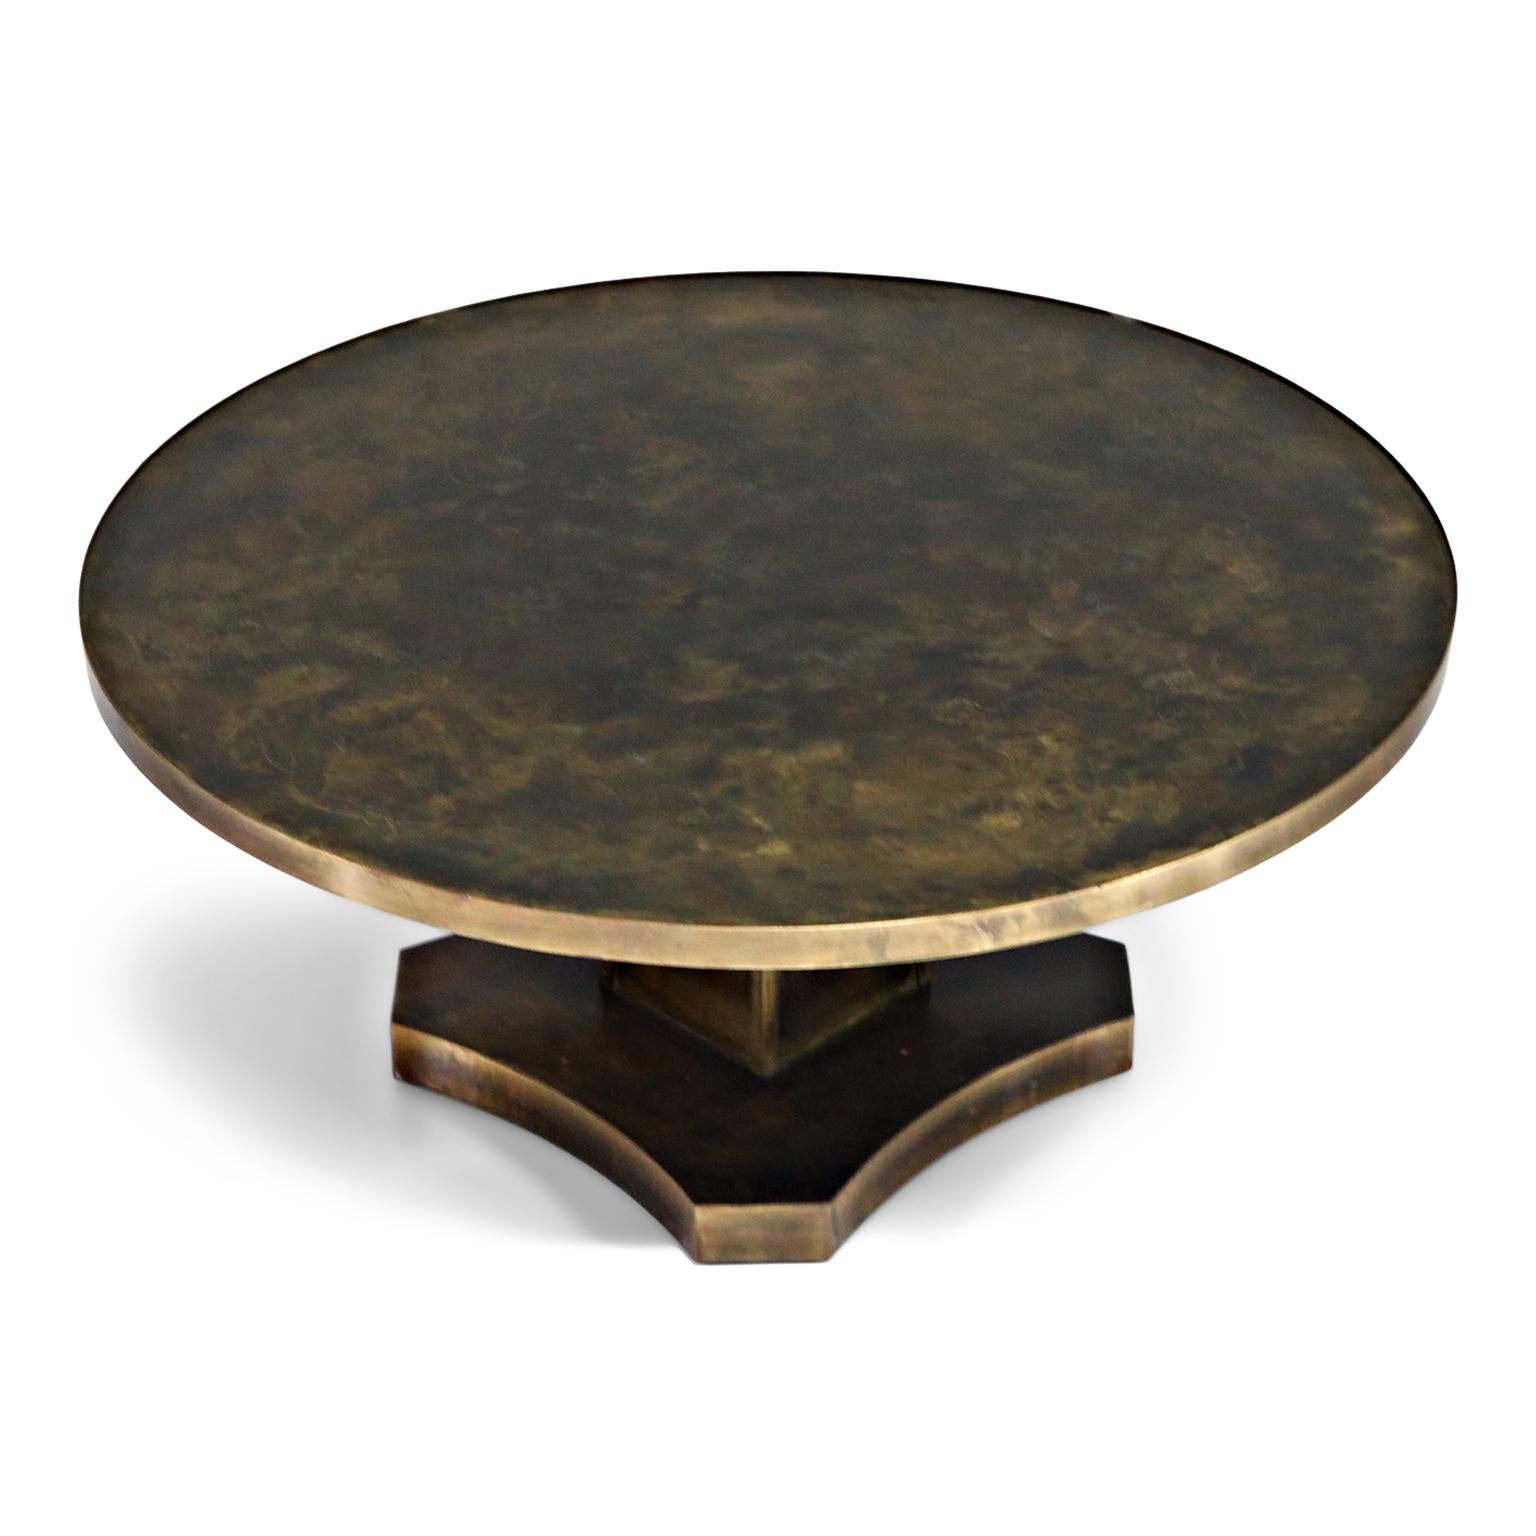 American Rare Base & Acid Etched Bronze Classical Table by Philip & Kelvin LaVerne, 1960s